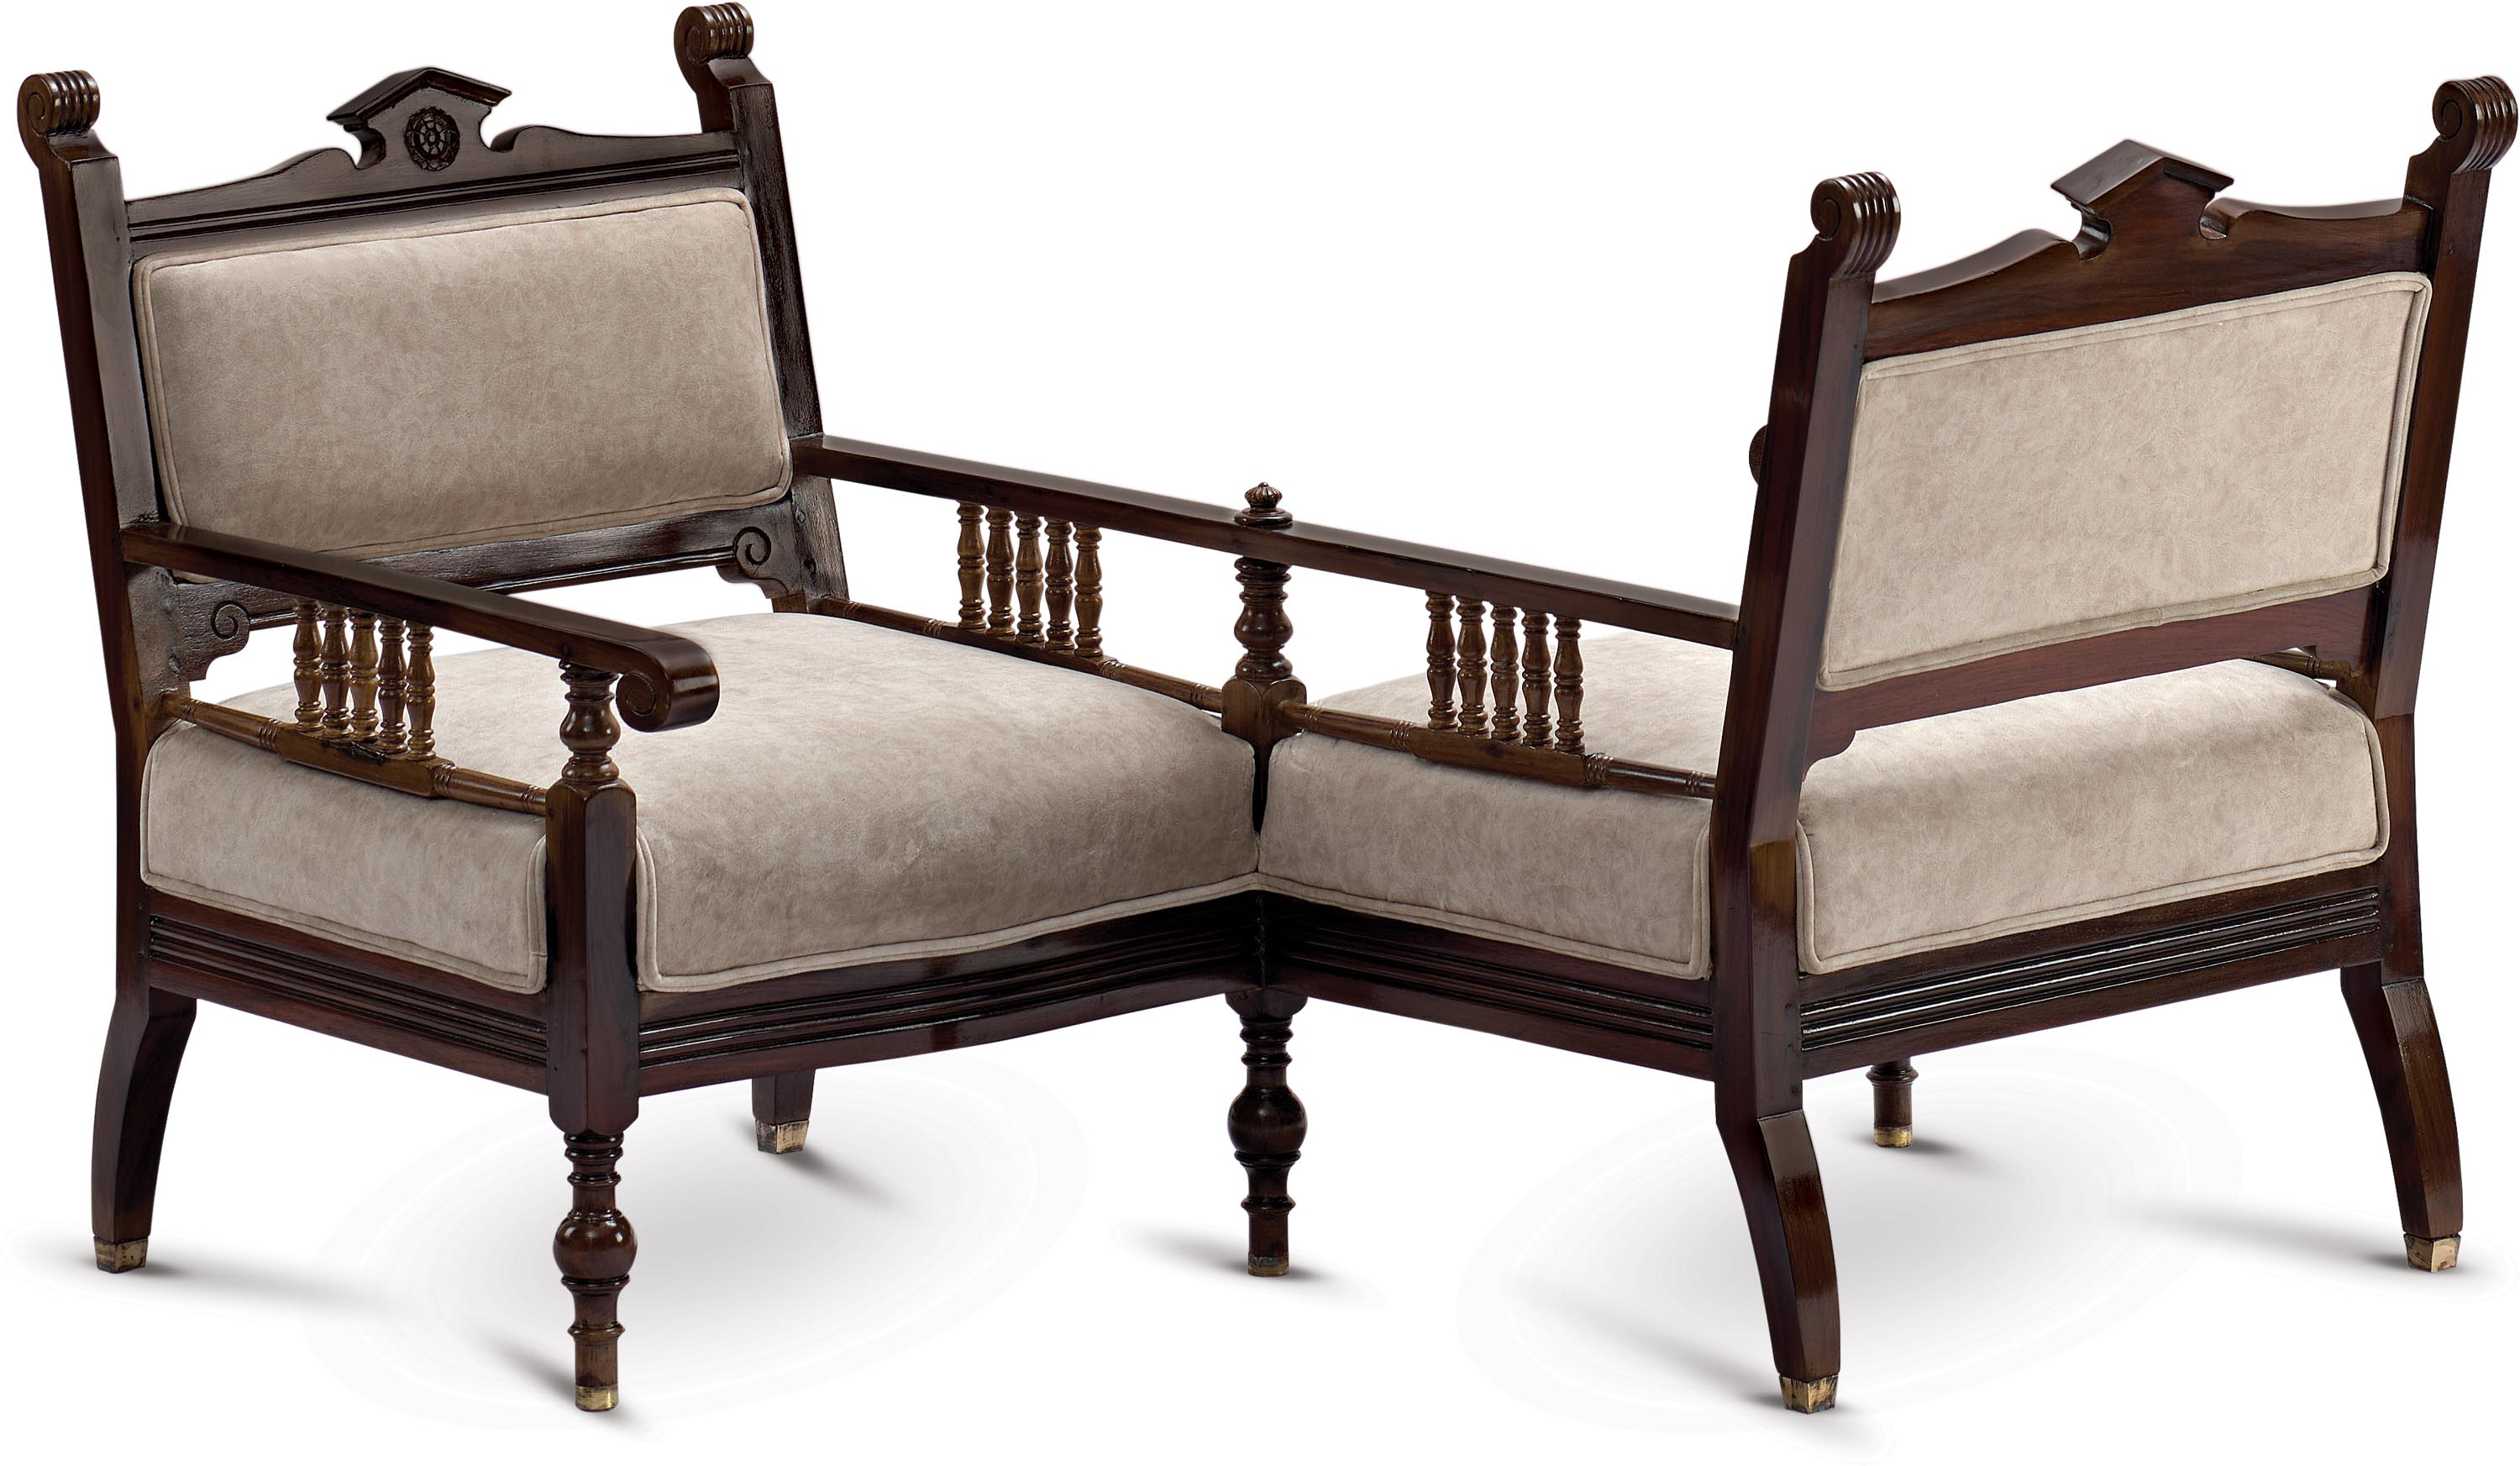 Lot no. 154, a Rosewood and Teakwood Loveseat 